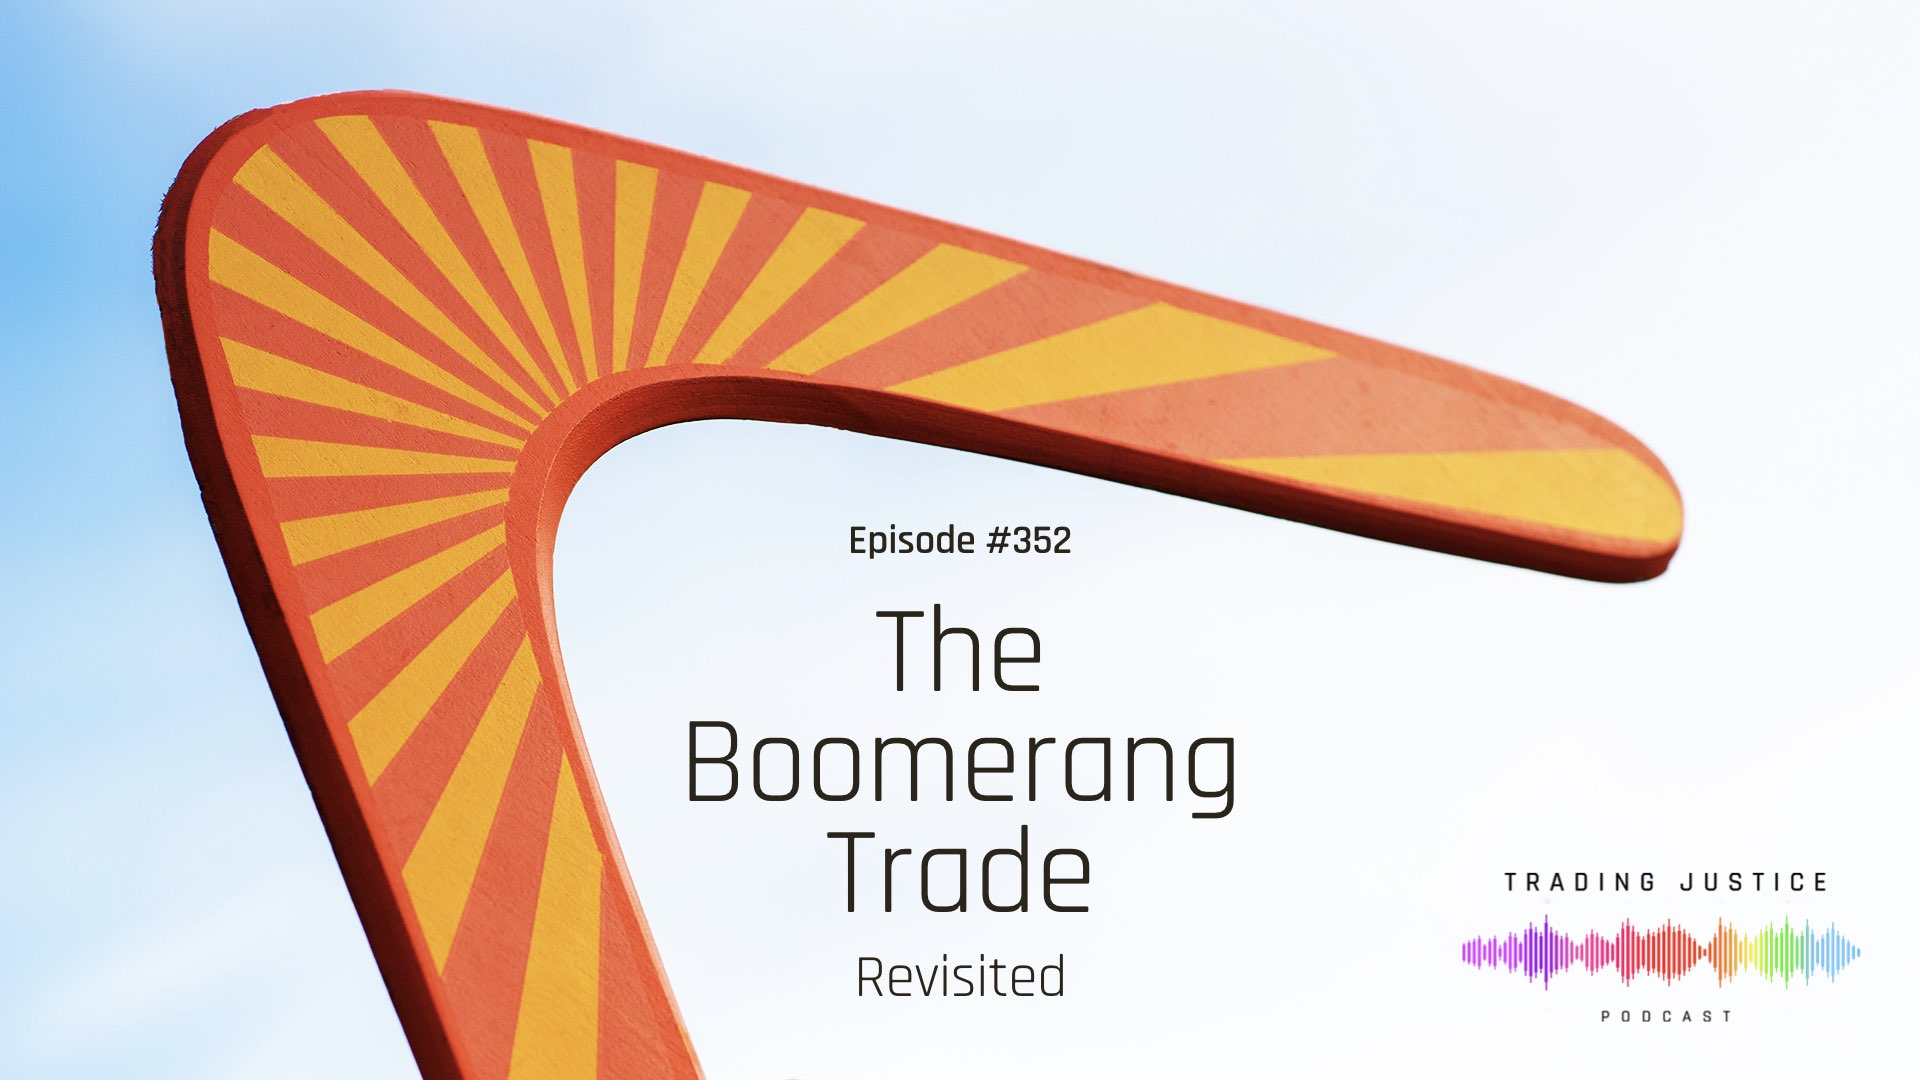 Episode 352: The Boomerang Trade Revisited